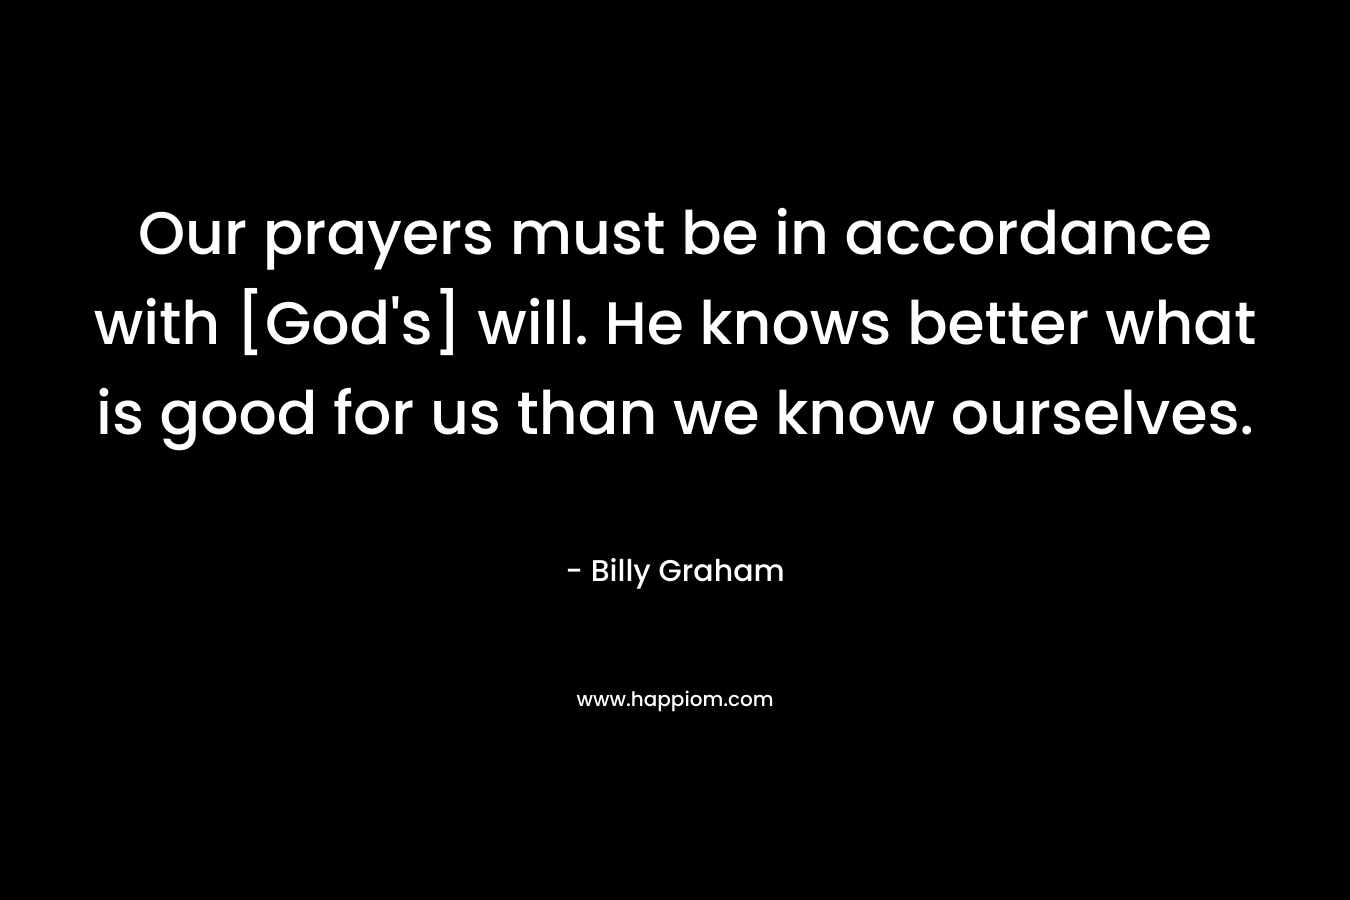 Our prayers must be in accordance with [God's] will. He knows better what is good for us than we know ourselves.